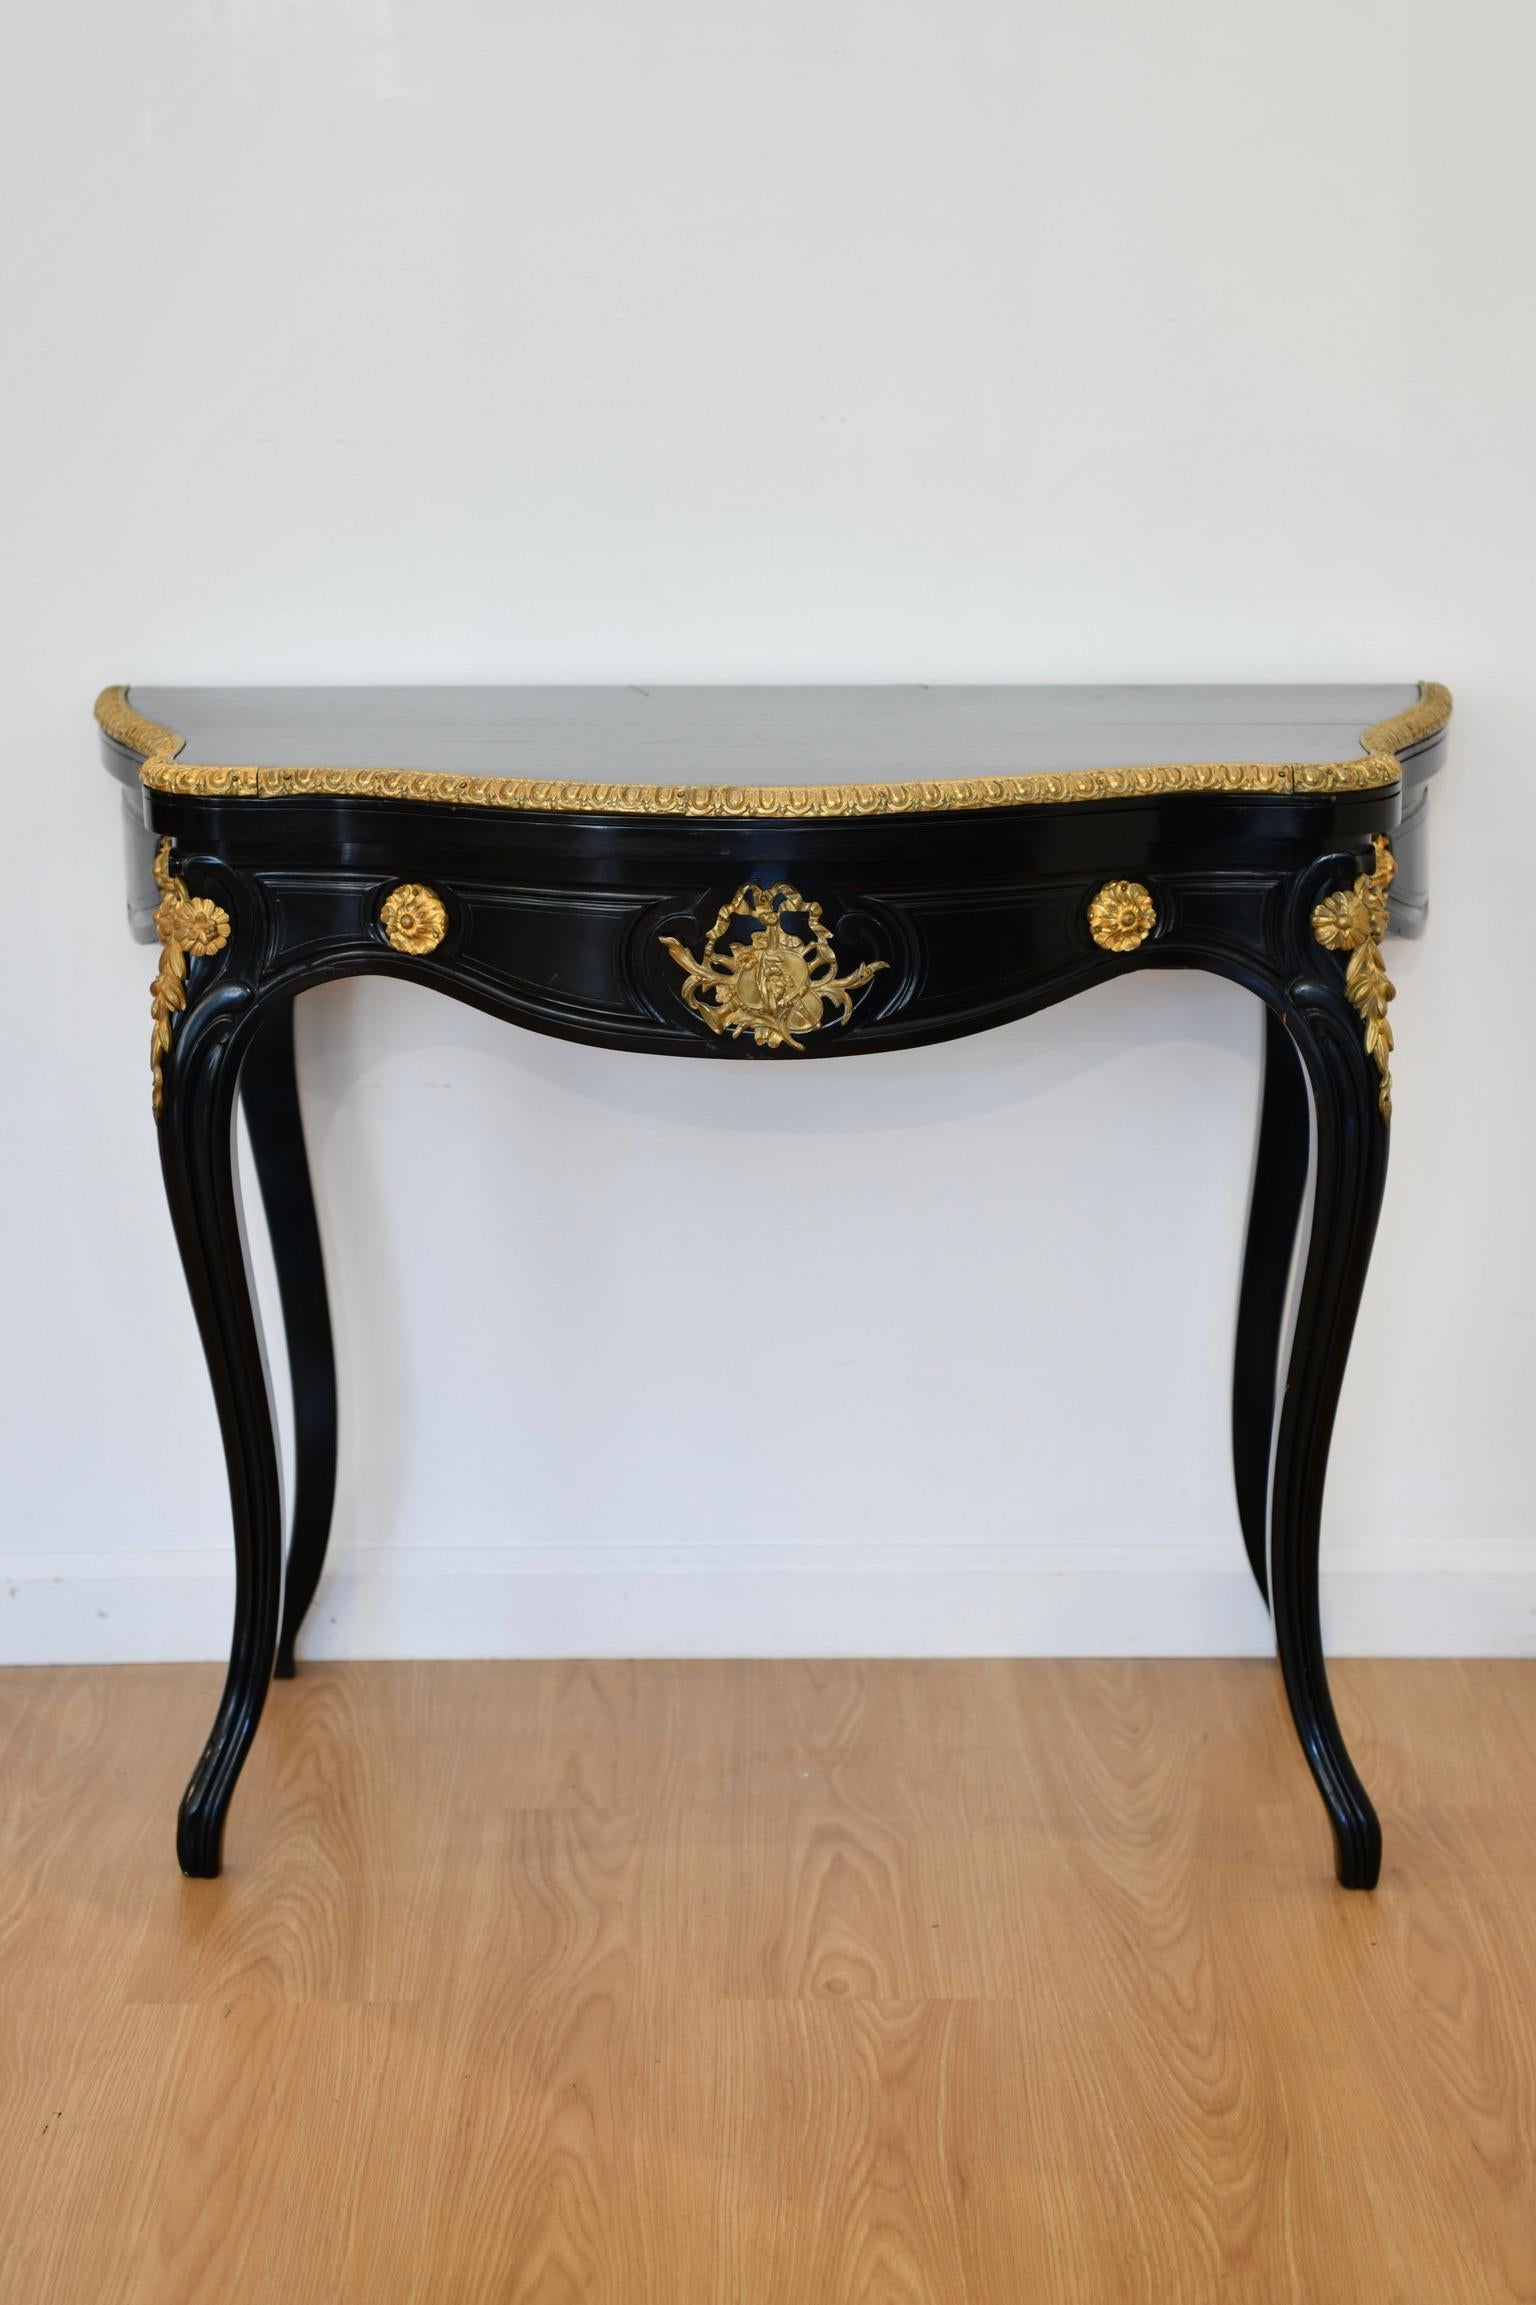 Alexander Roux ebonised and bronze mounted games table with label on base, circa 1870. Dimensions: 29